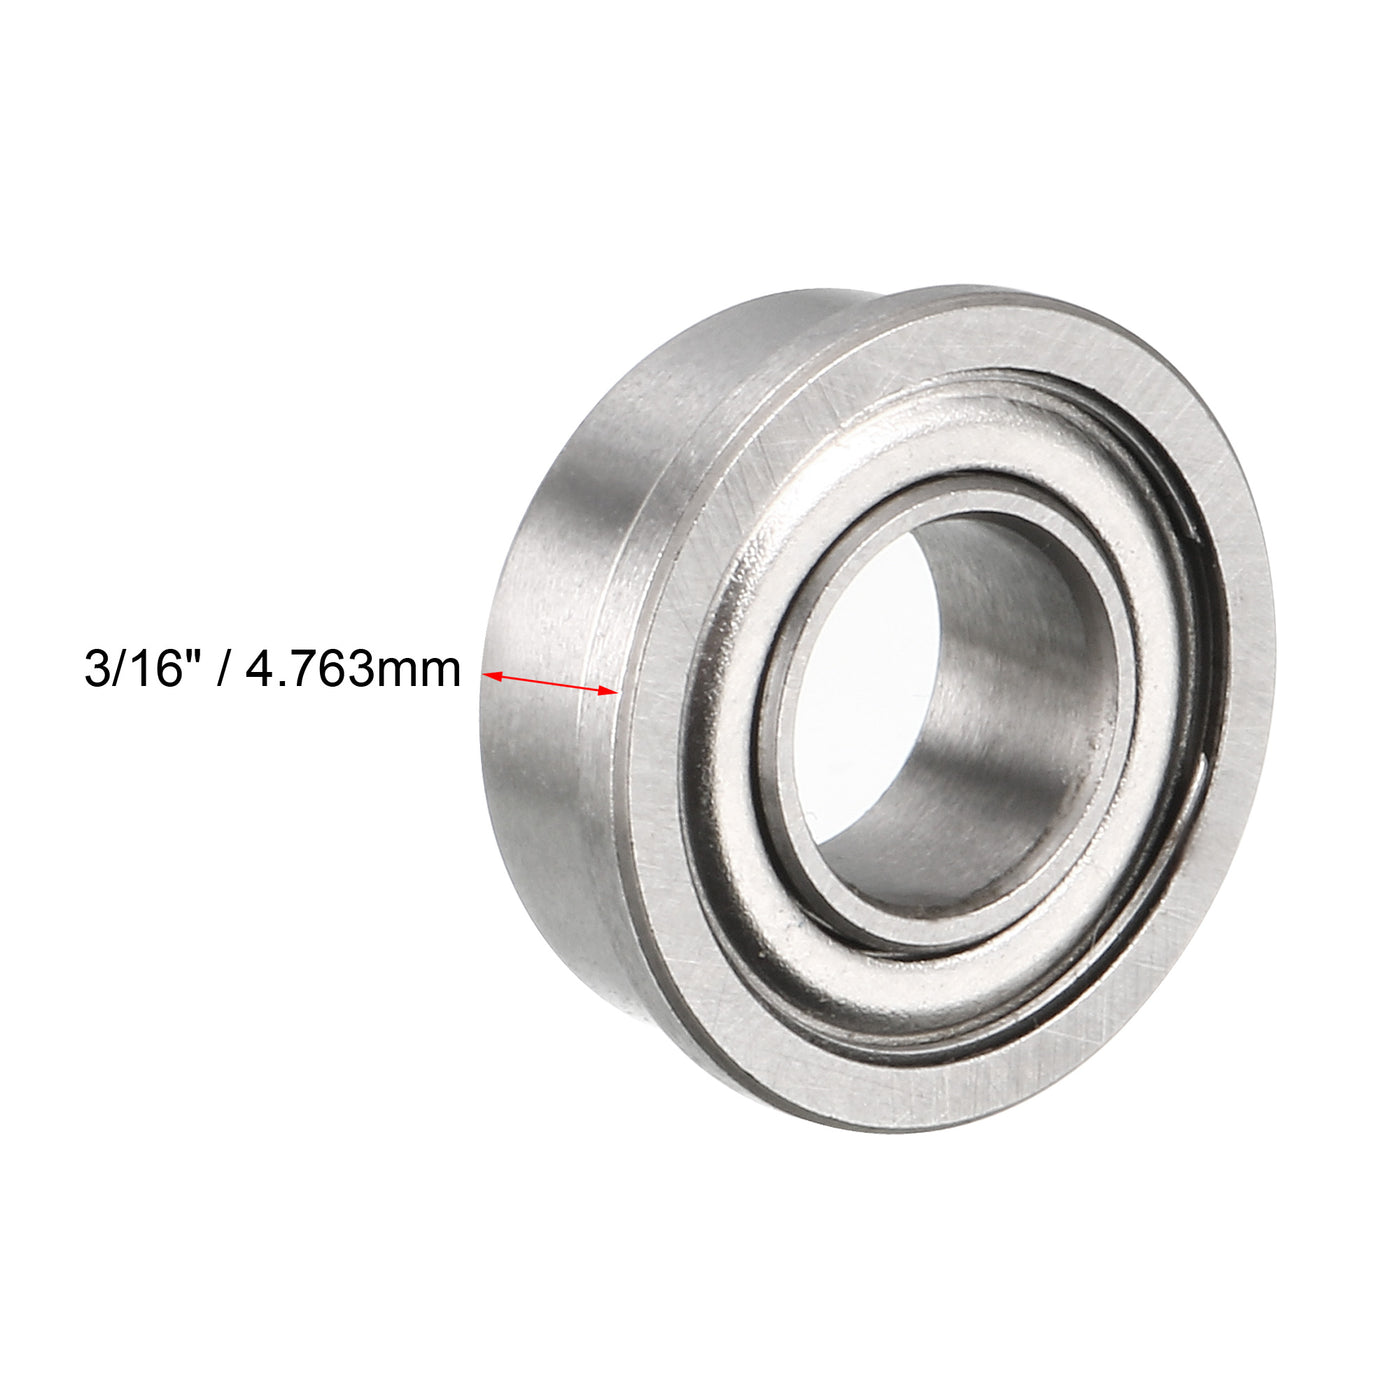 Uxcell Uxcell F688ZZ Flange Ball Bearing 8x16x5mm Shielded Chrome Steel Z2 Lever Bearings 2pcs